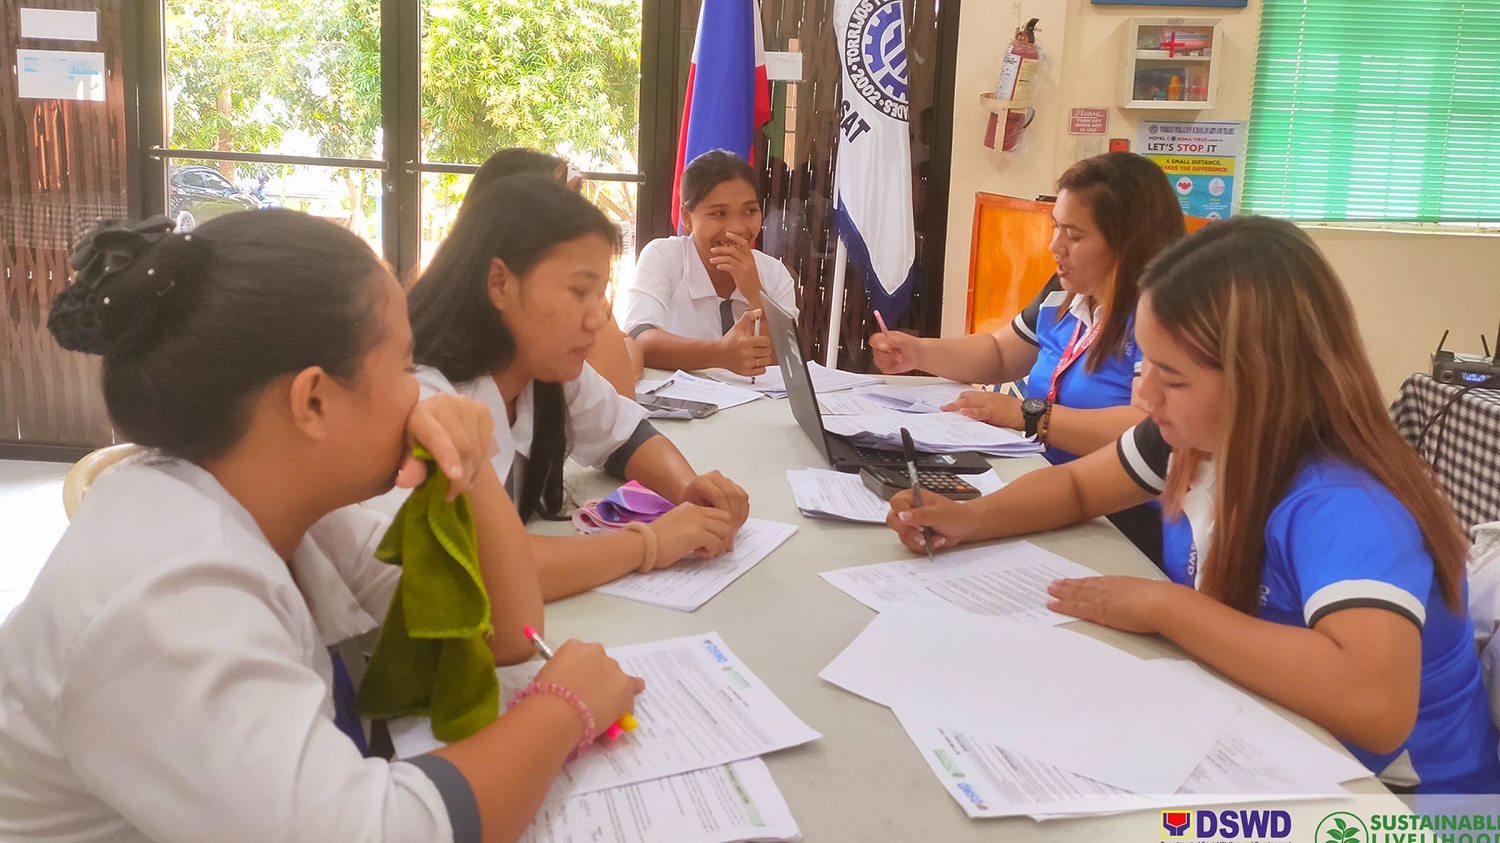 Student entrepreneurs in Torrijos to receive P375K capital fund from DSWD